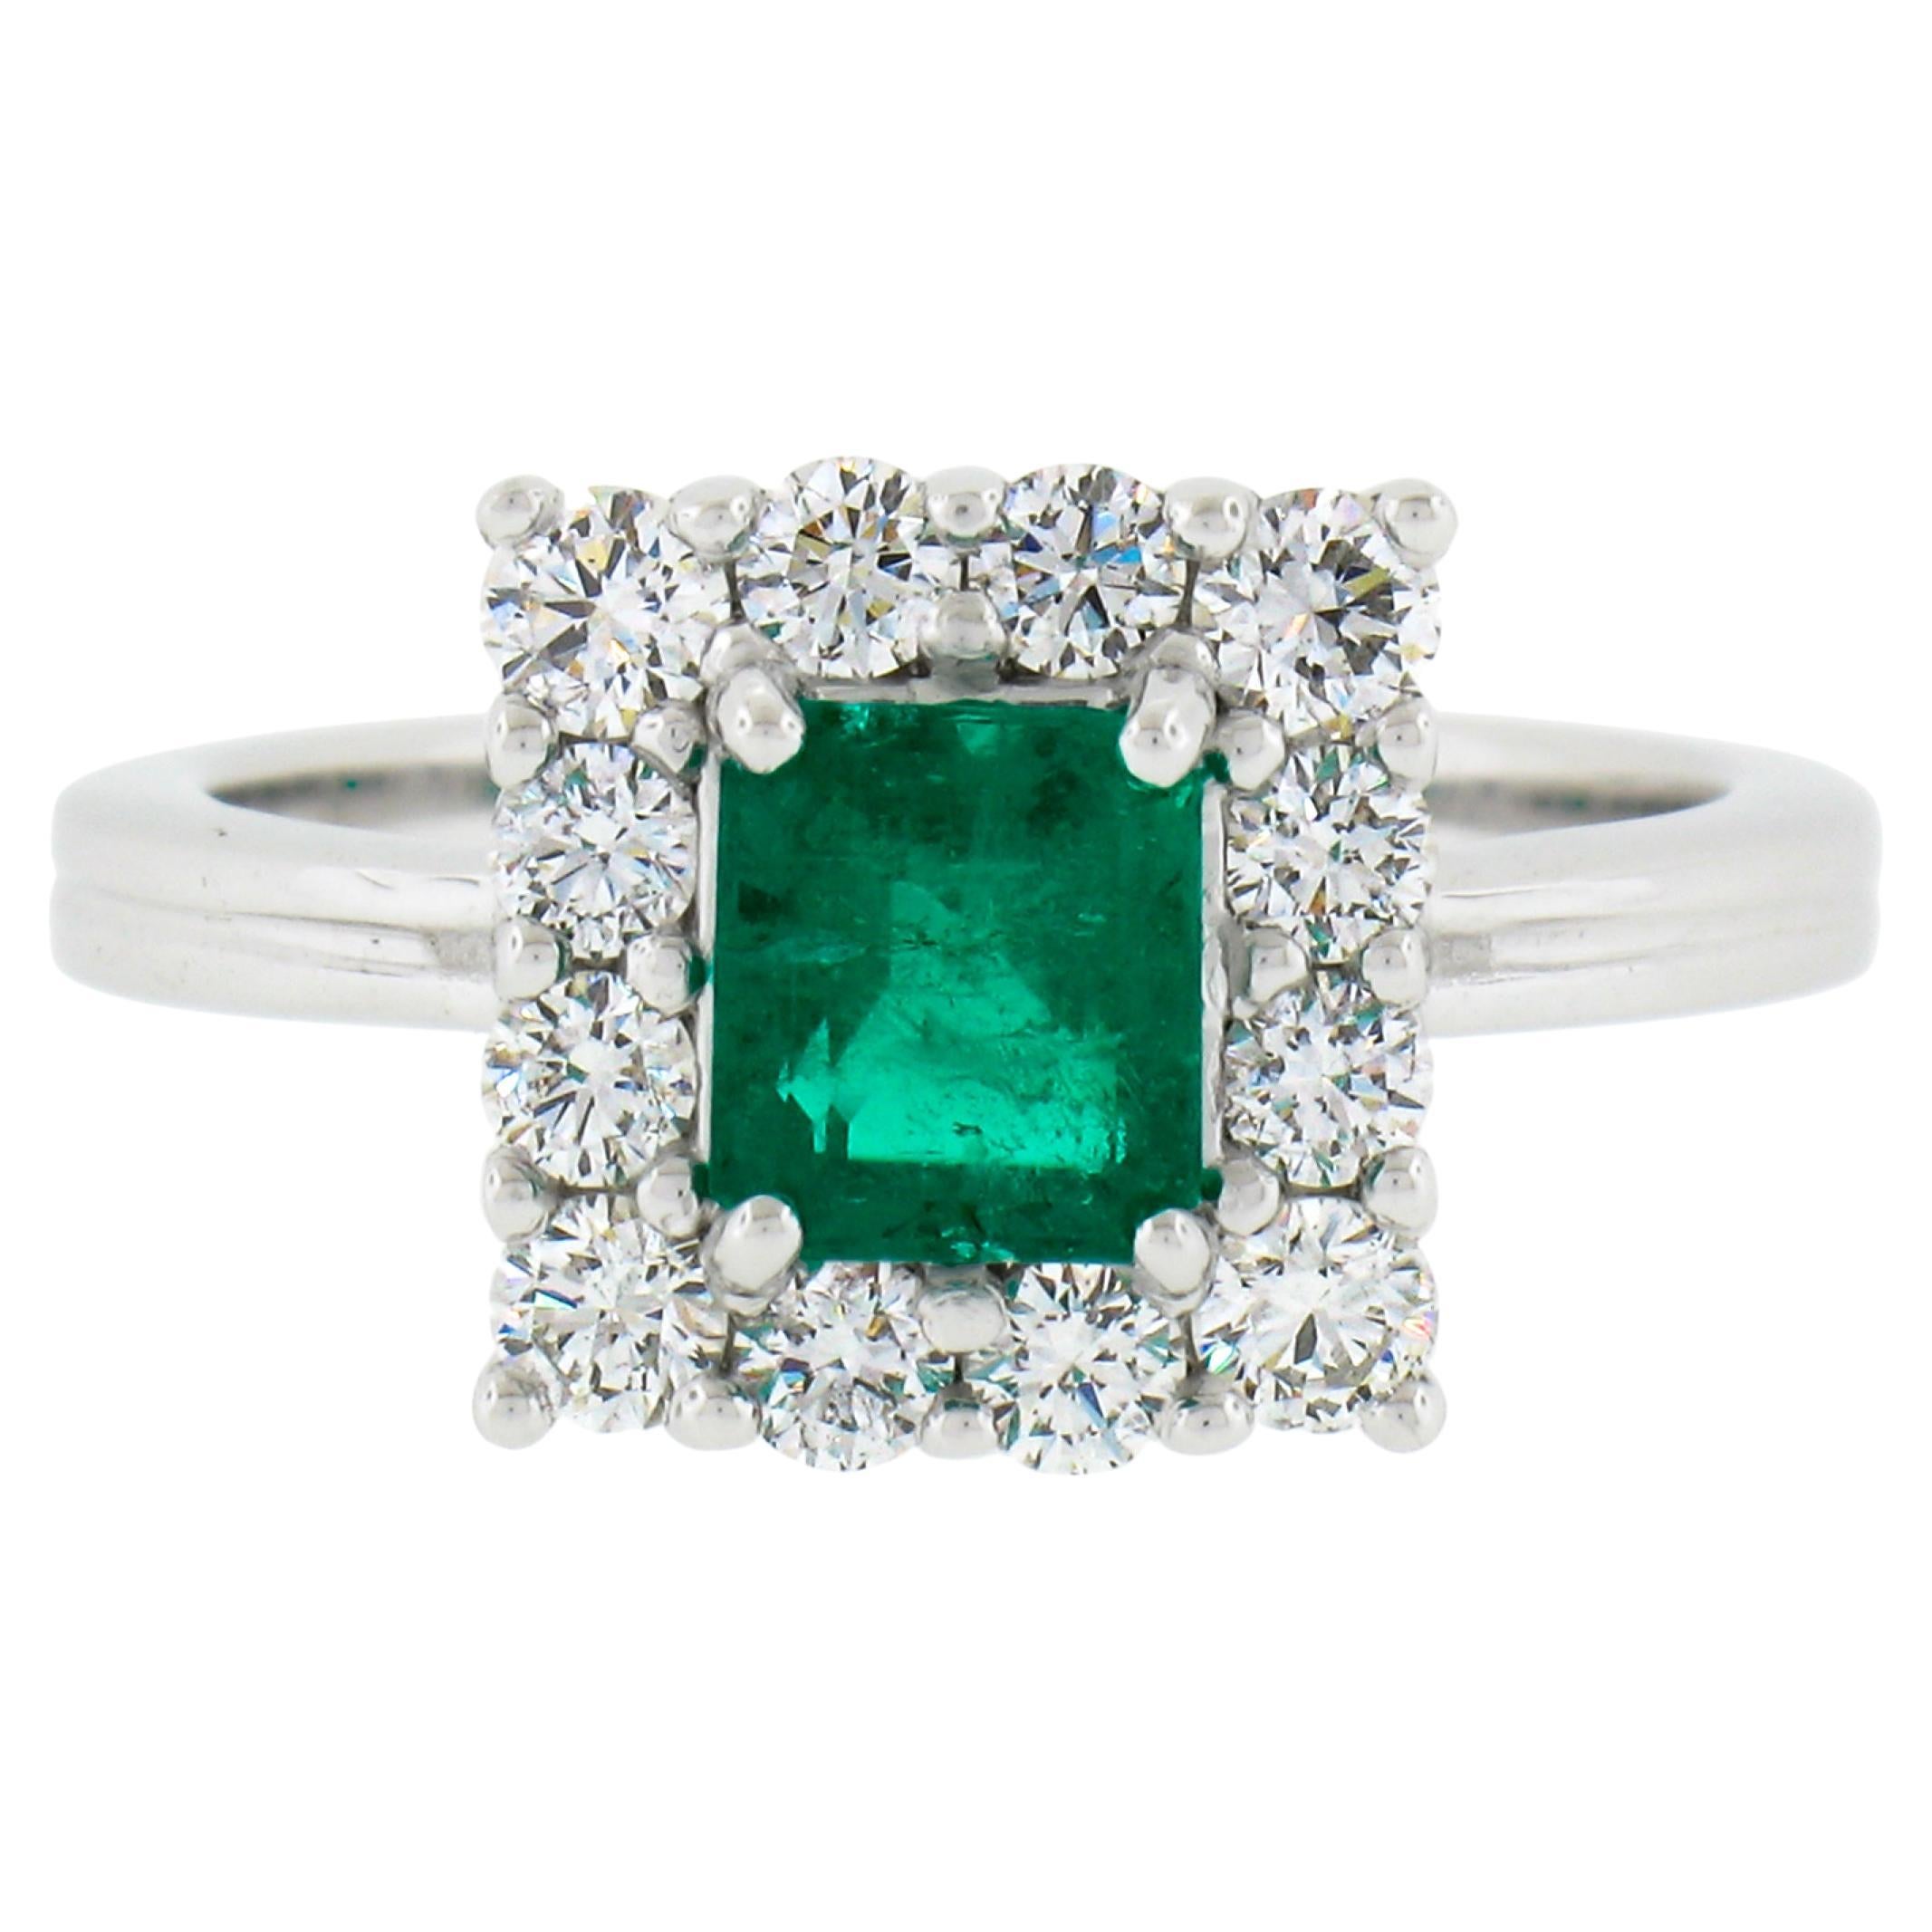 NEW Platinum 1.51ctw GIA Colombian Green Emerald w/ Diamond Halo Cocktail Ring For Sale